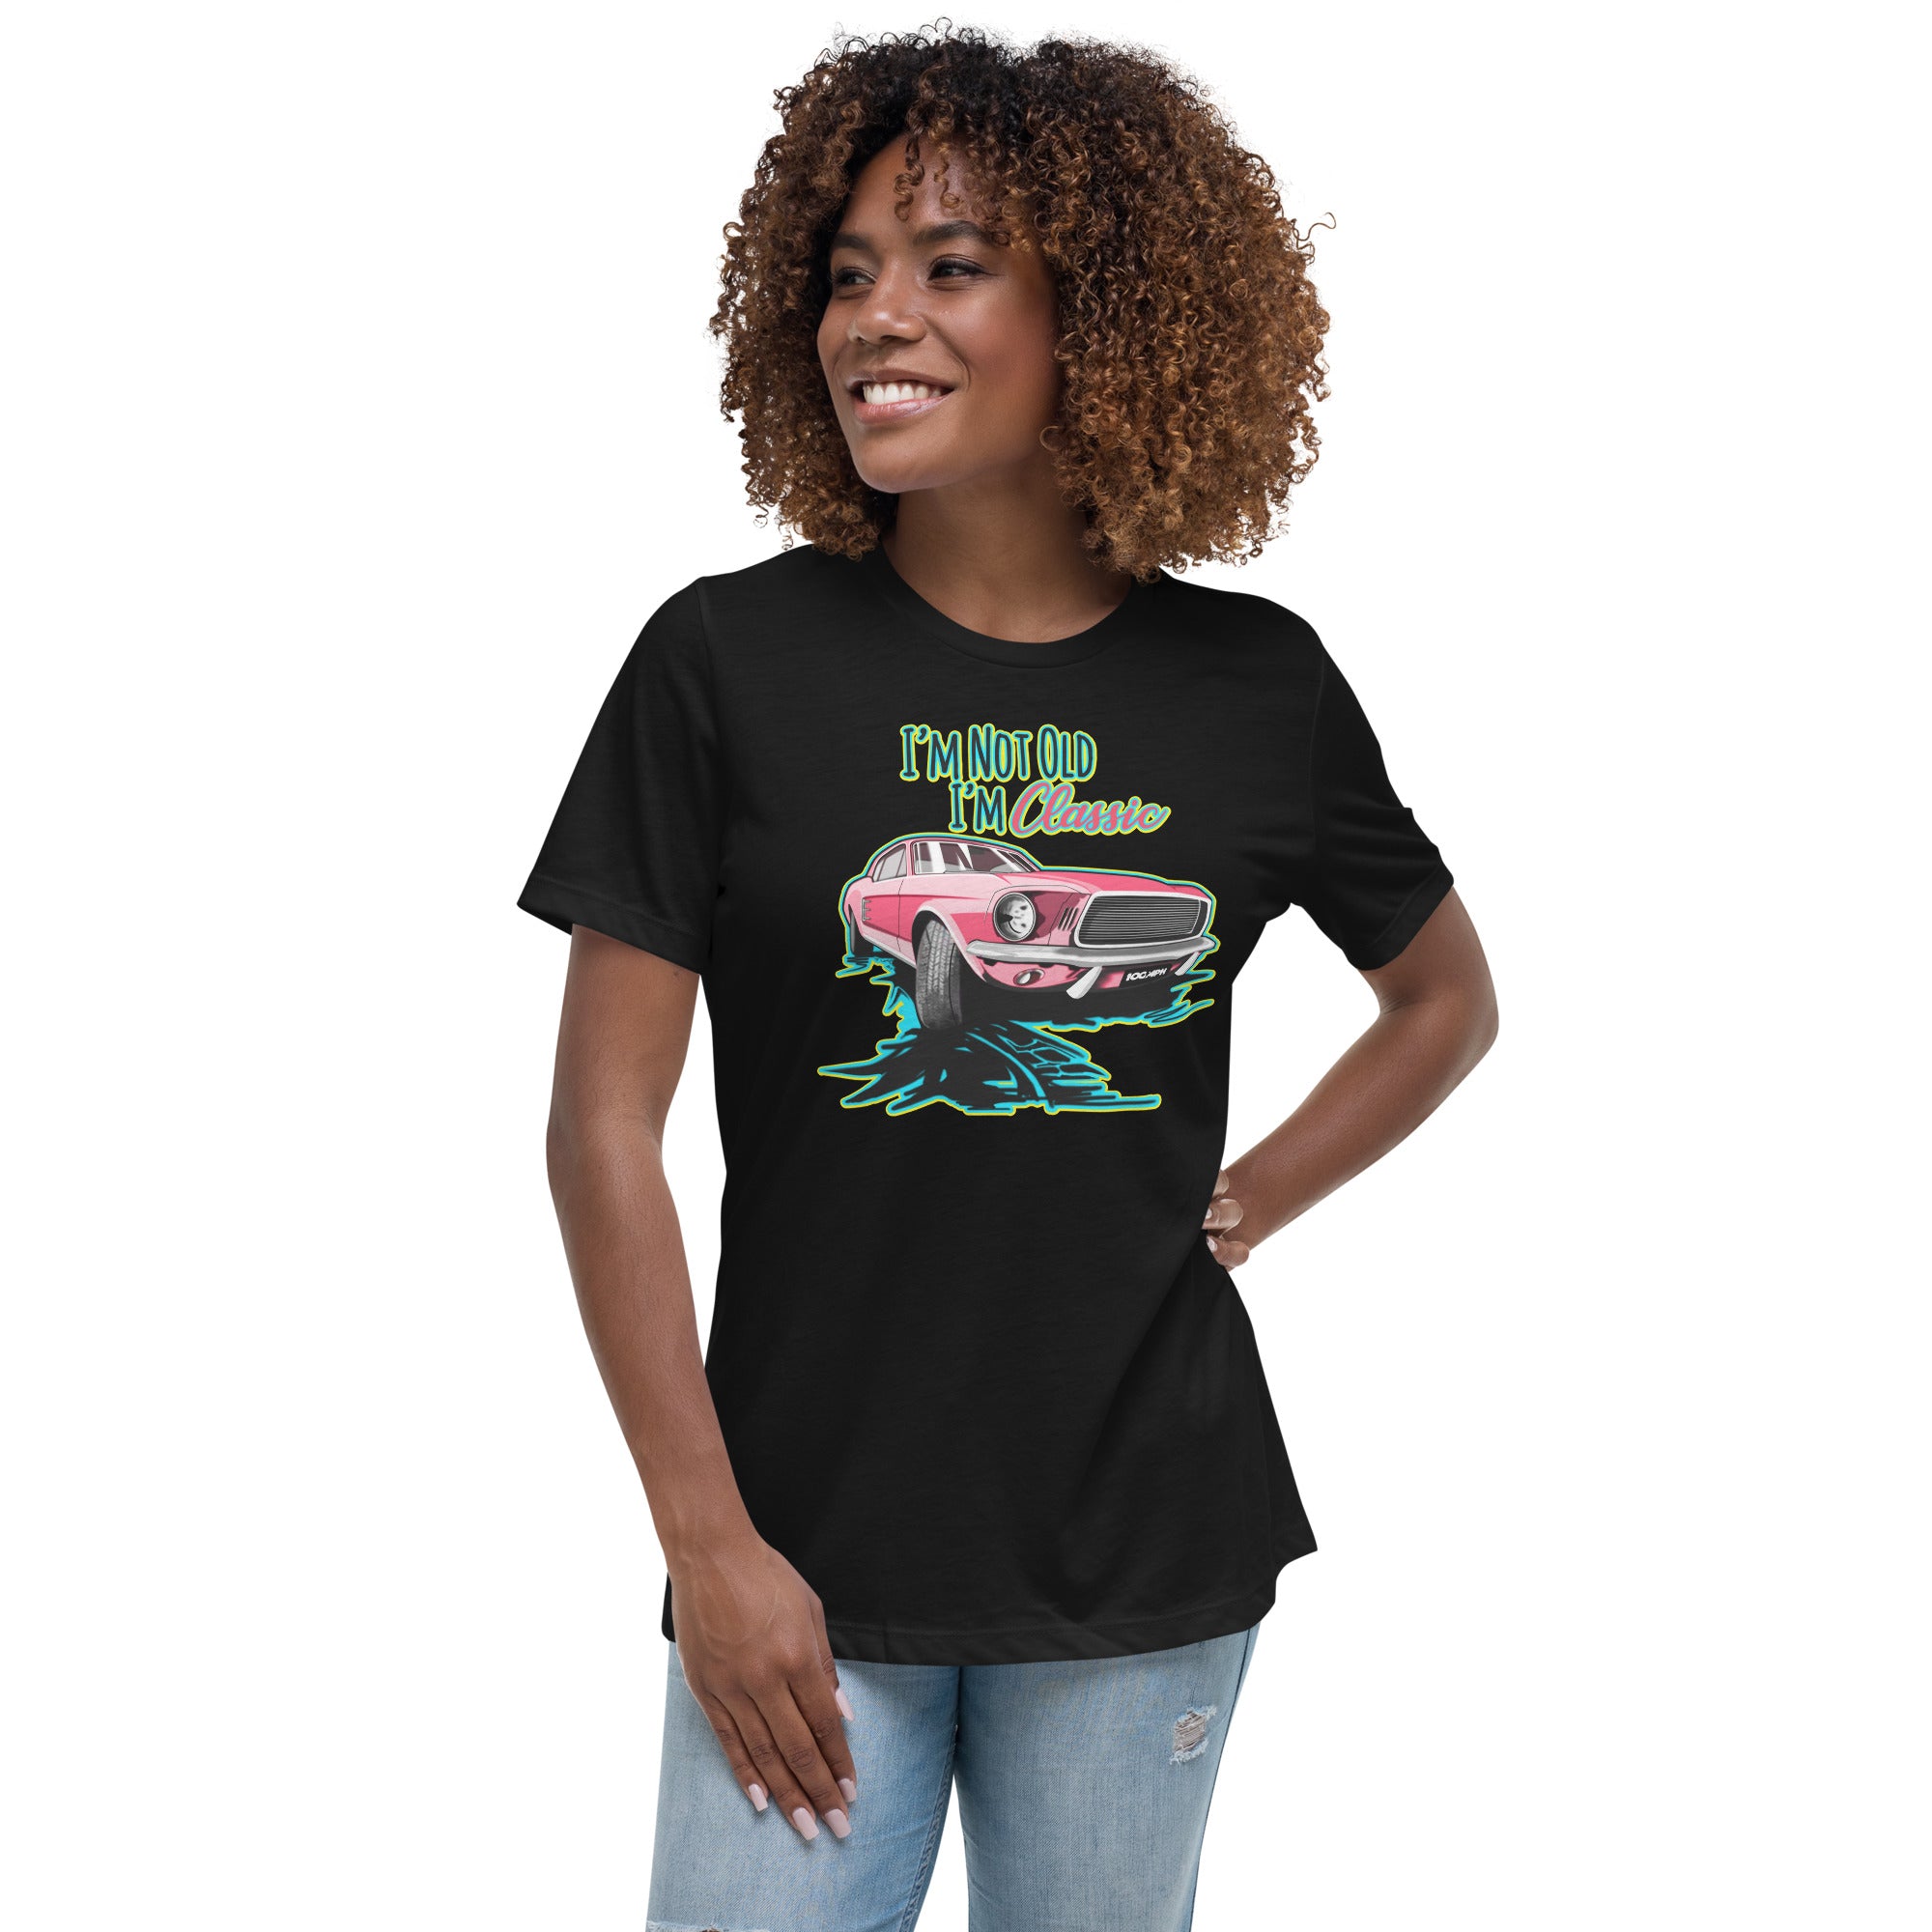 "I'm Not Old, I'm Classic" Classic Ford Mustang Tee Shirt - Women's